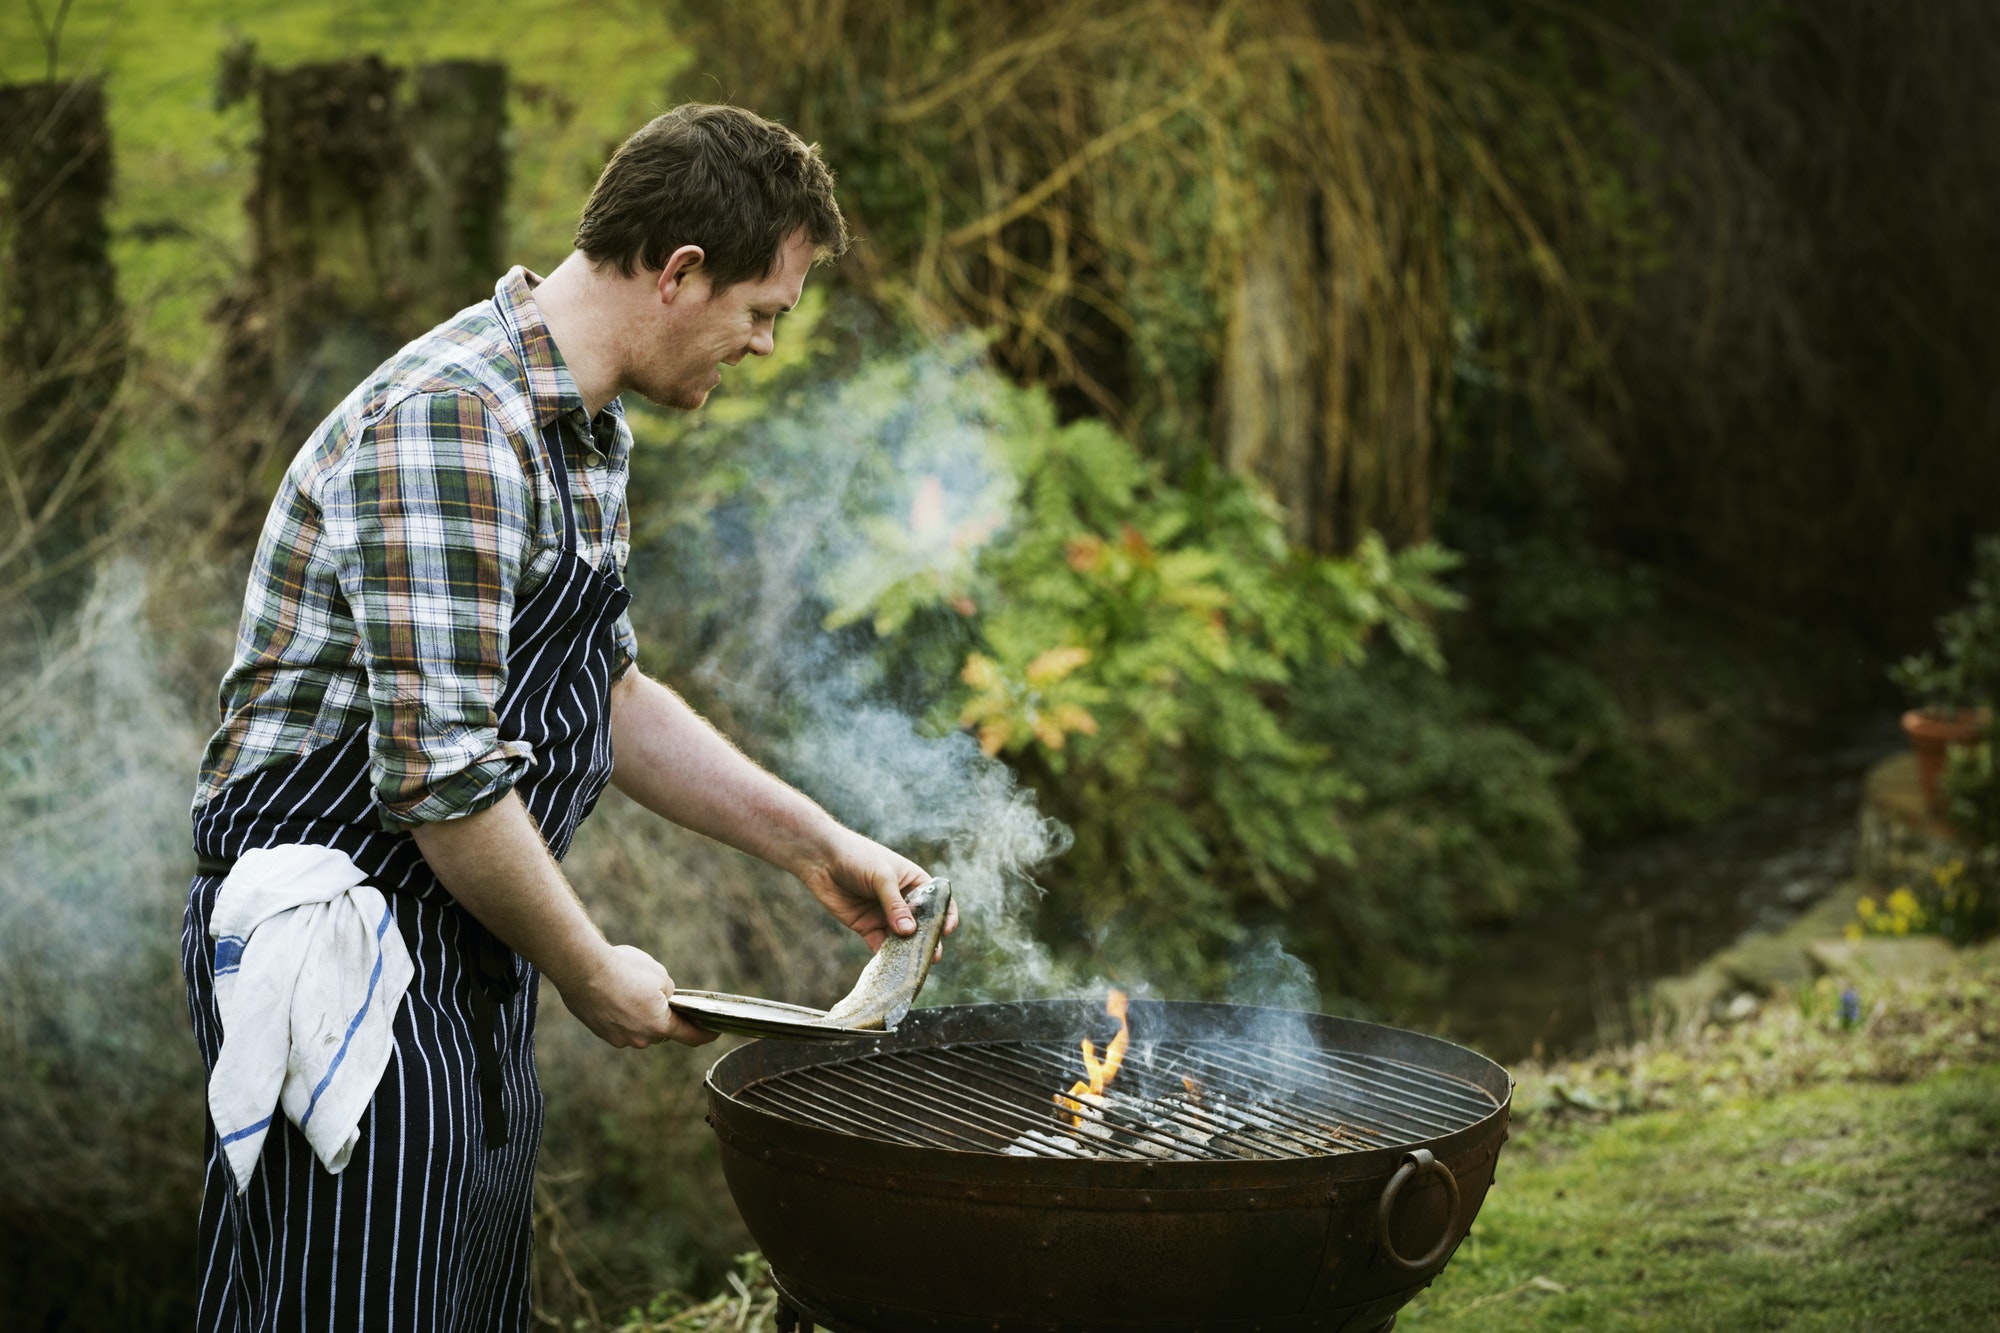 Chef standing in a garden, grilling fish on a barbecue.